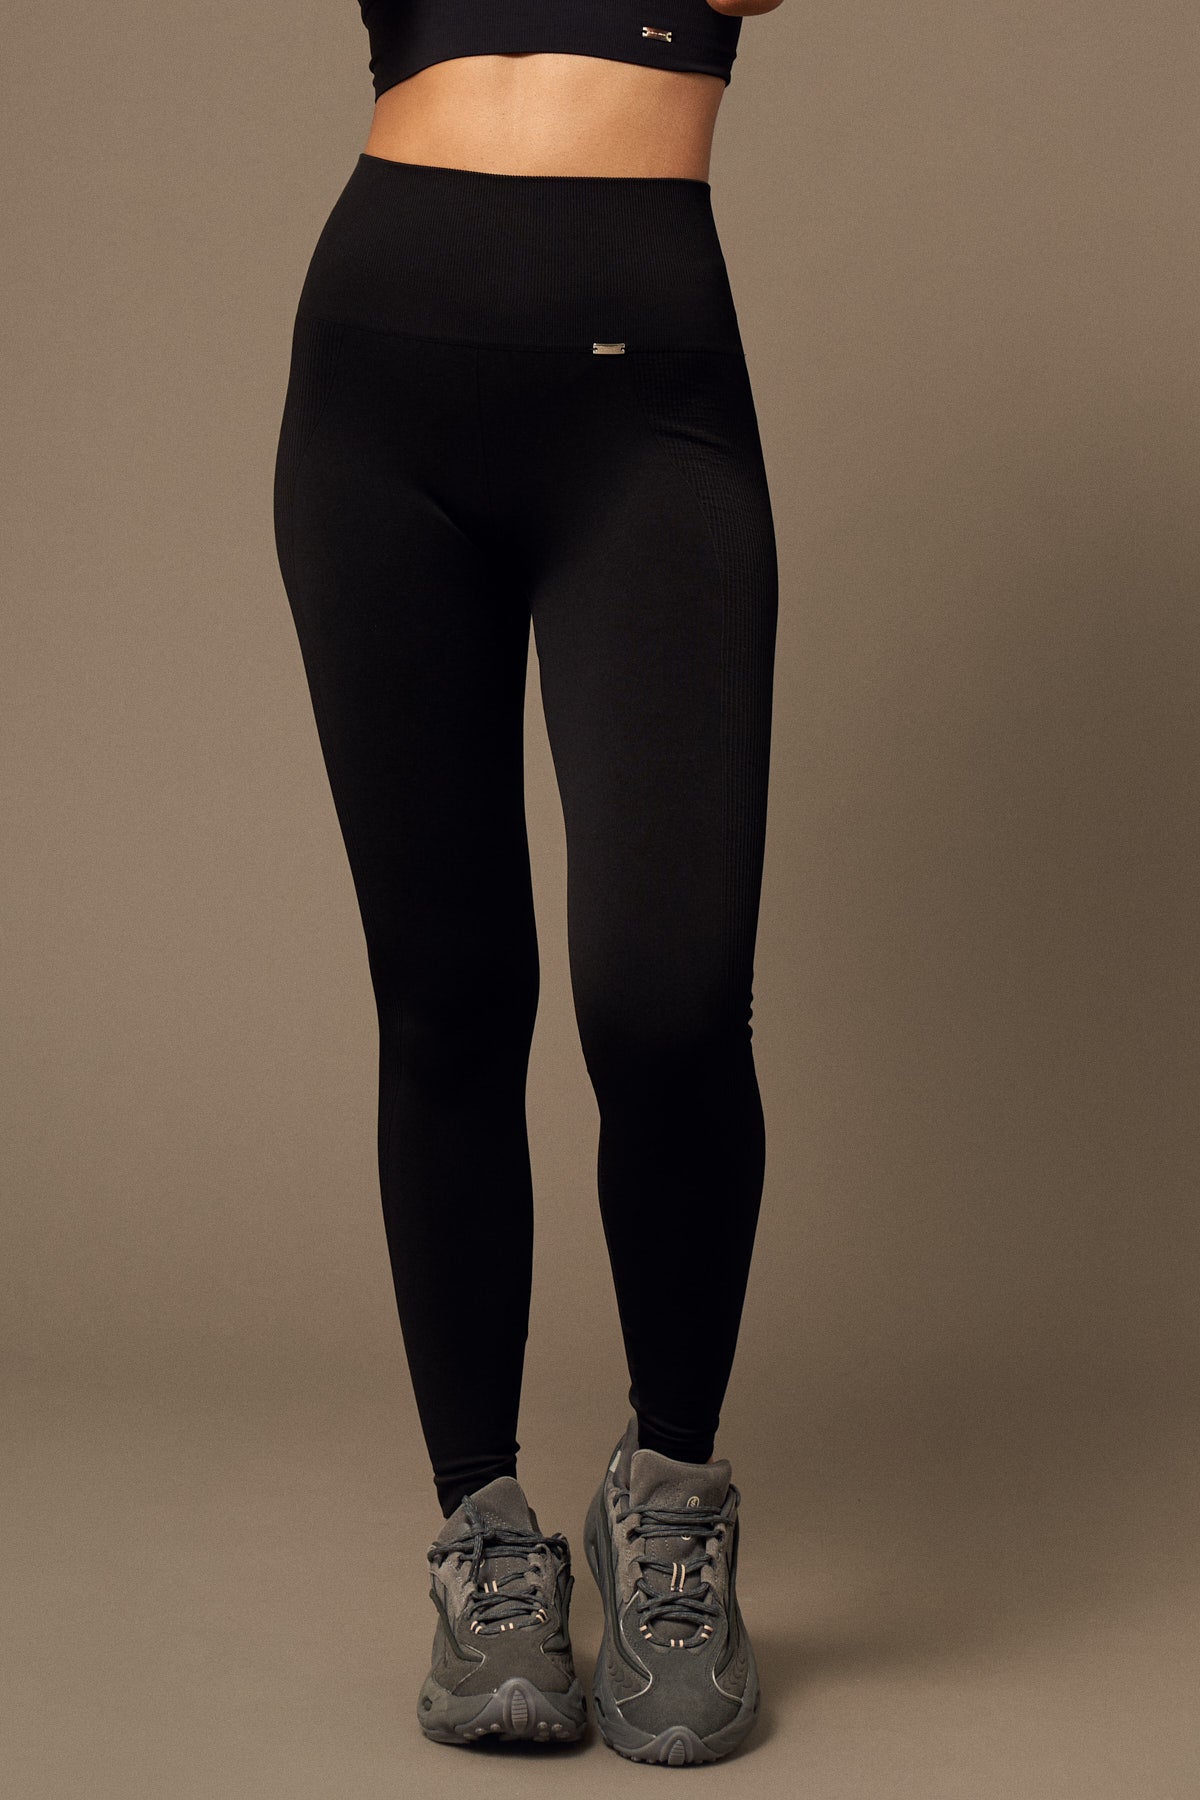 Bliss Legging 2.0 in Black-Long Leggings-Shop Sustainable Recycled Yoga Leggings Women's Clothing On-line Barcelona Believe Athletics Sustainable Recycled Yoga Clothes